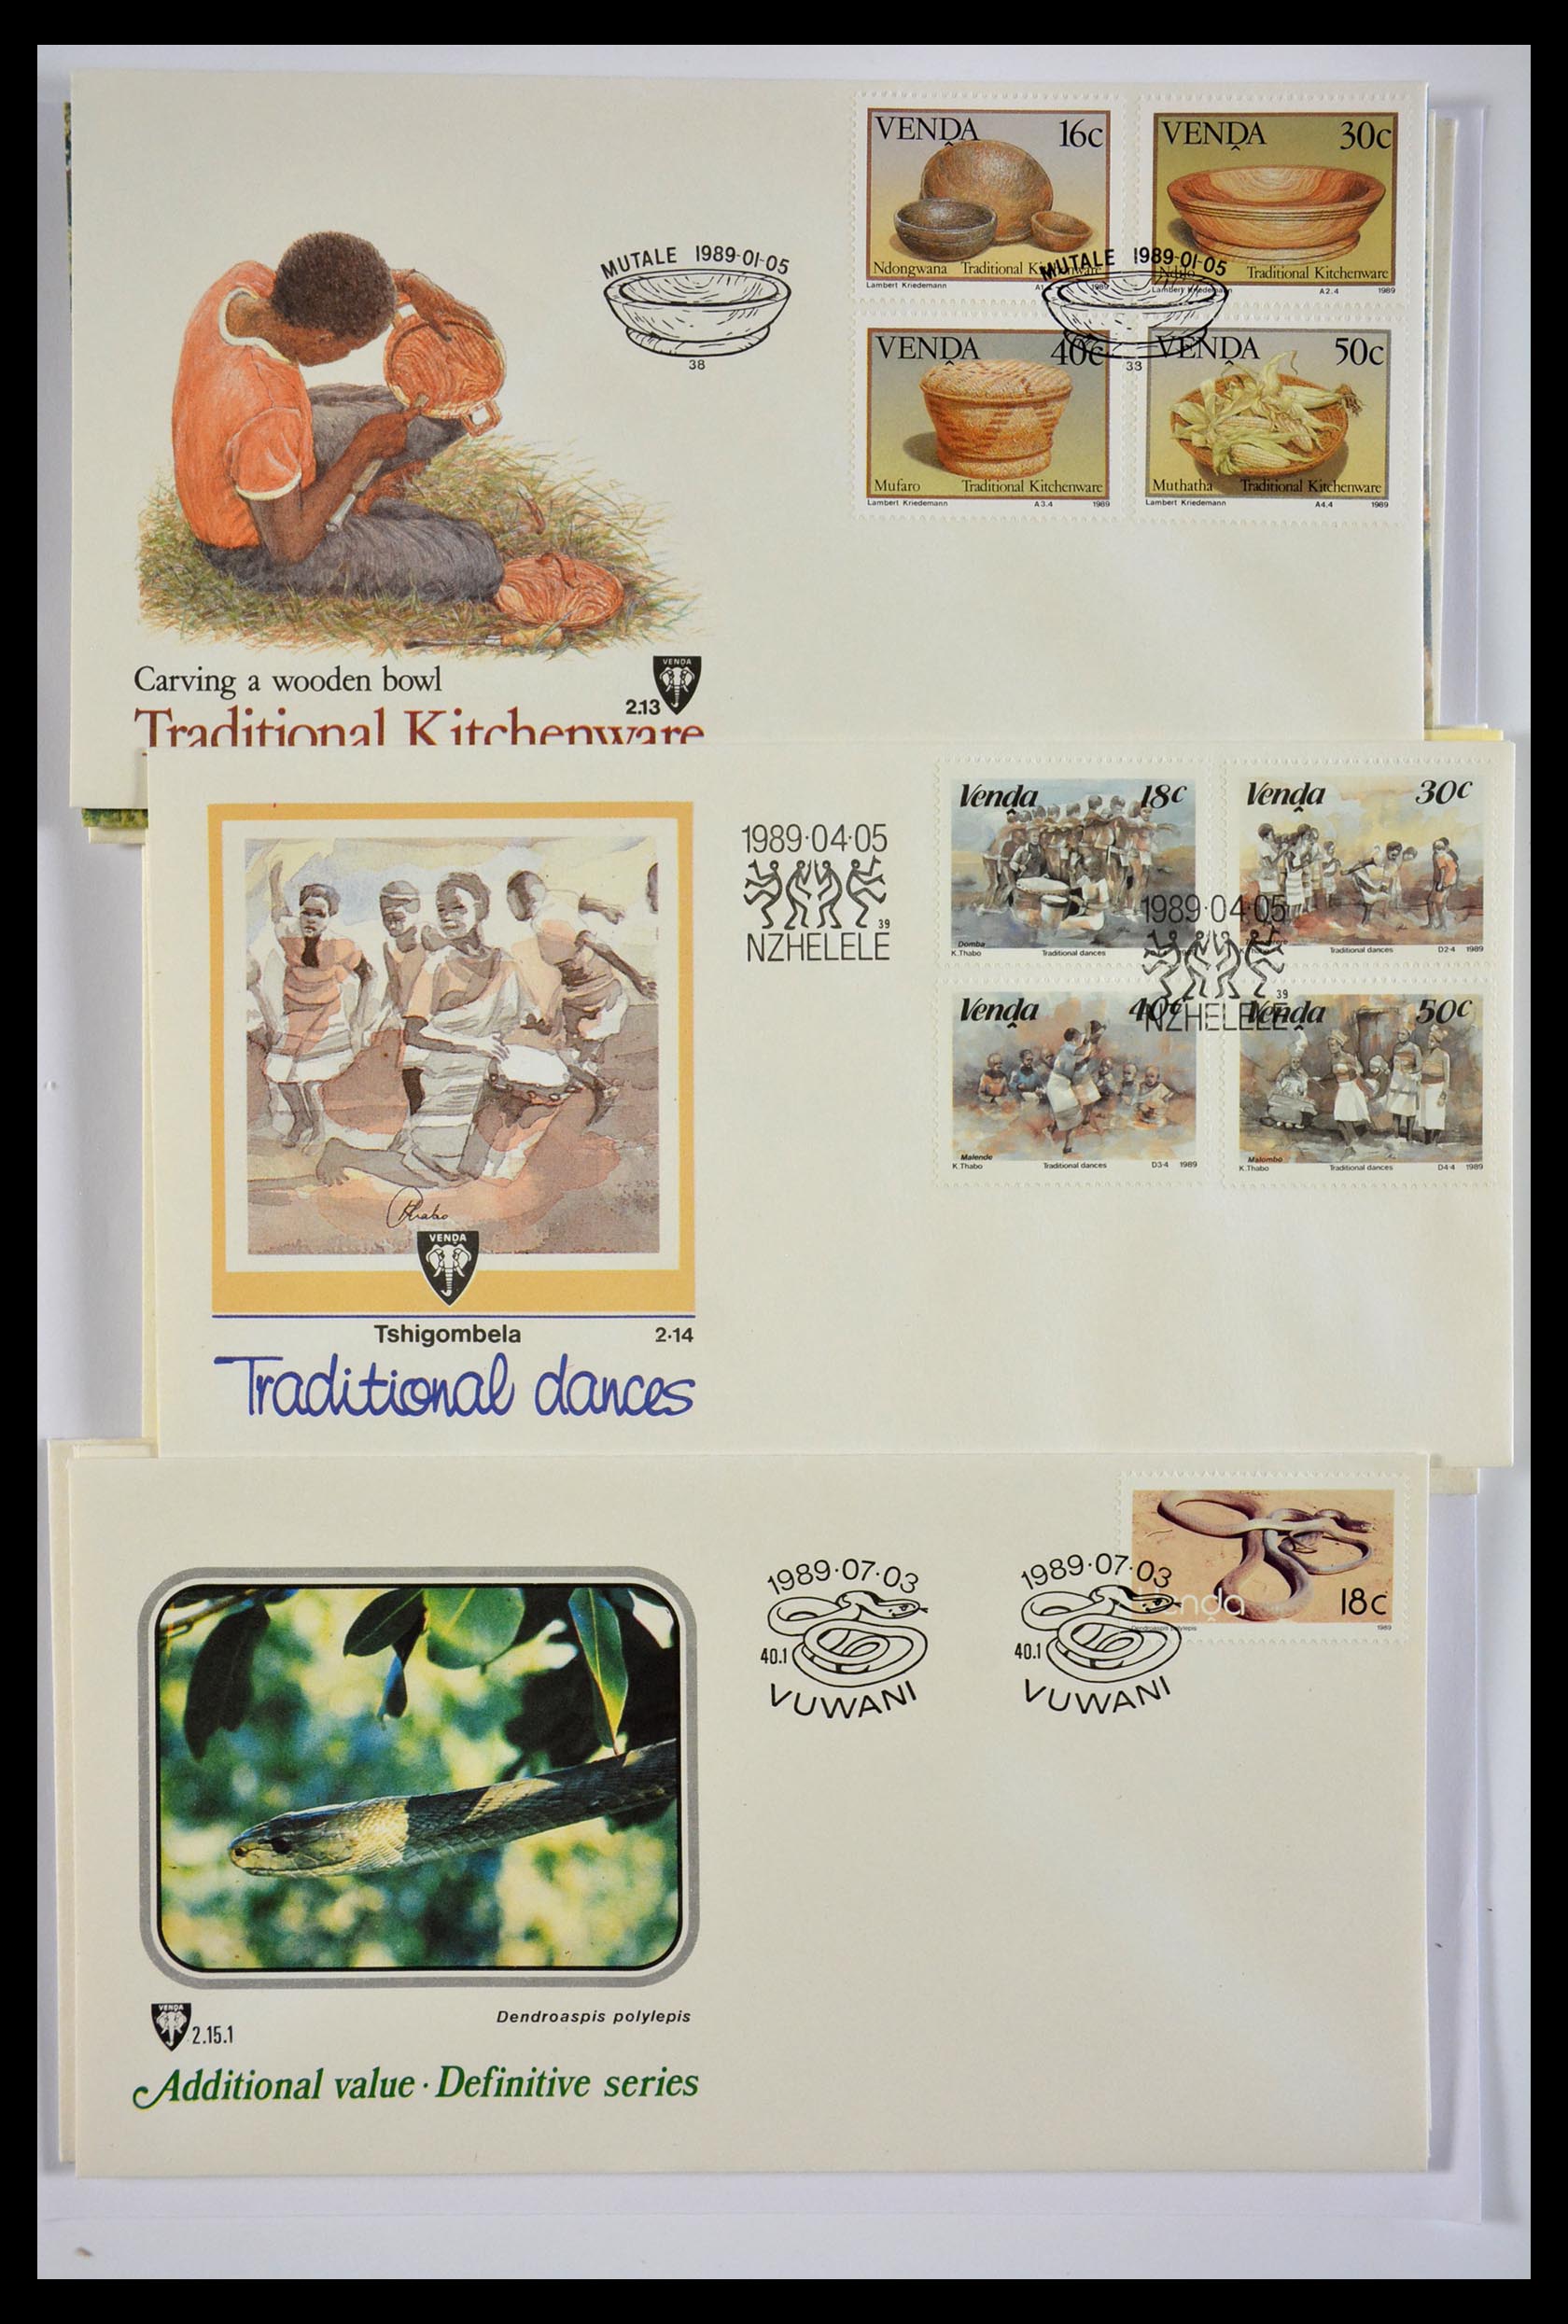 29356 576 - 29356 South Africa homelands first day covers 1979-1991.